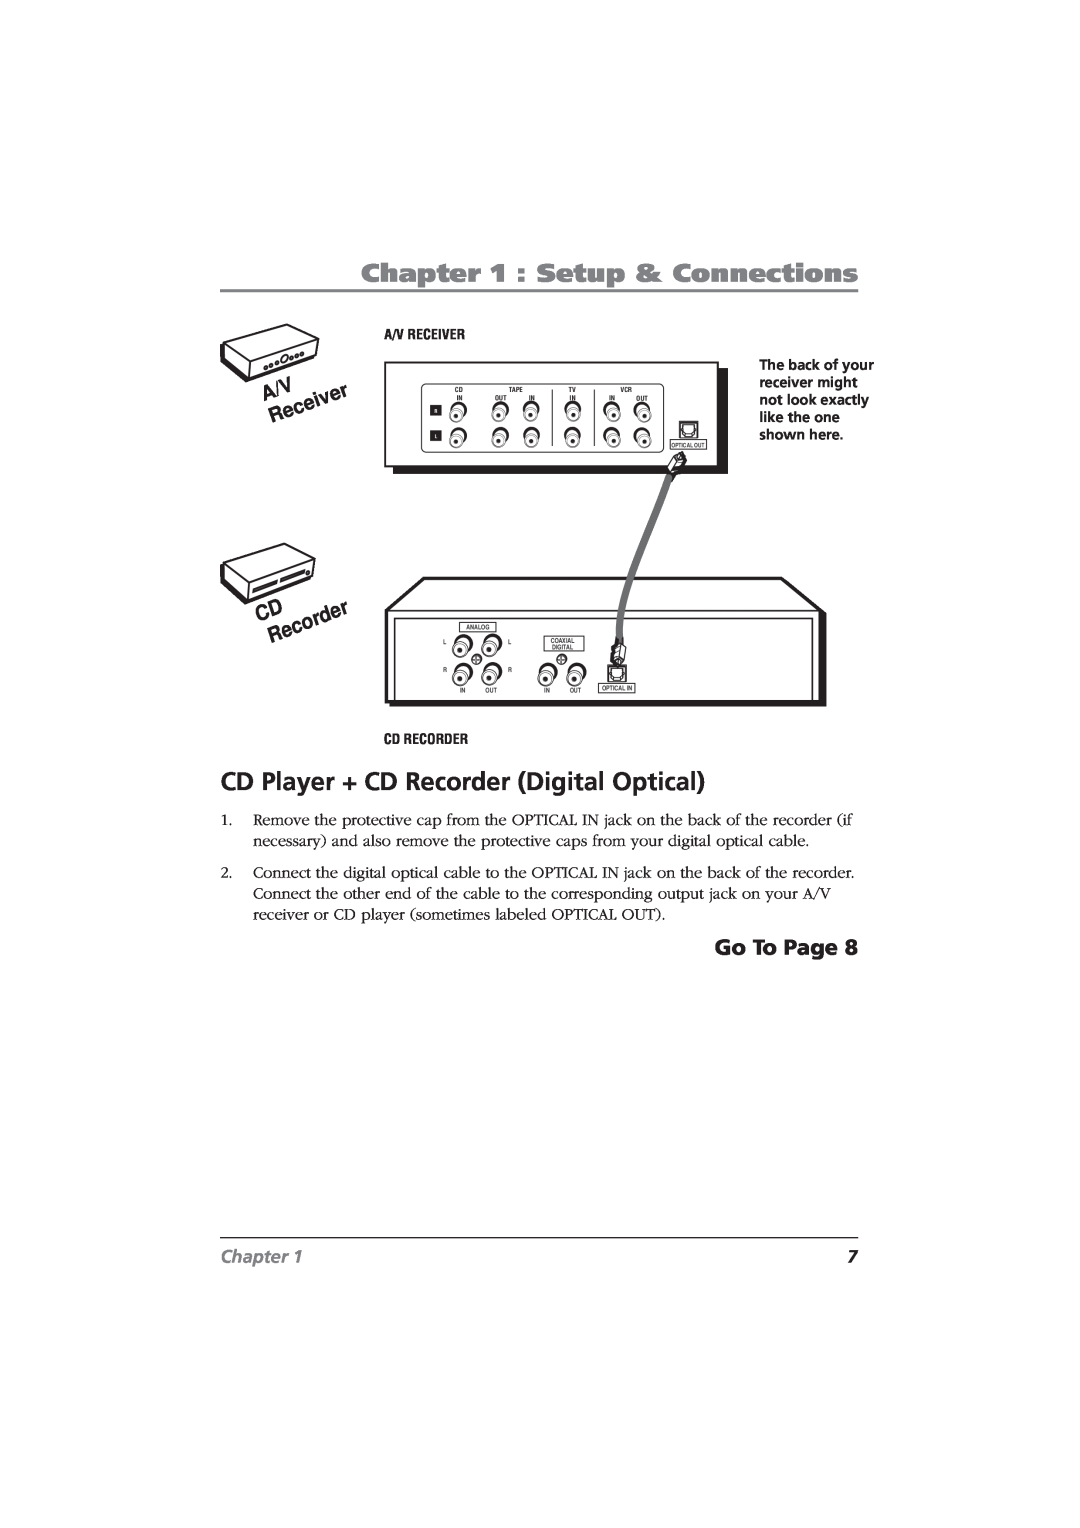 RCA CDRW10 manual CD Player + CD Recorder Digital Optical, Setup & Connections, iver, Rece, Chapter 